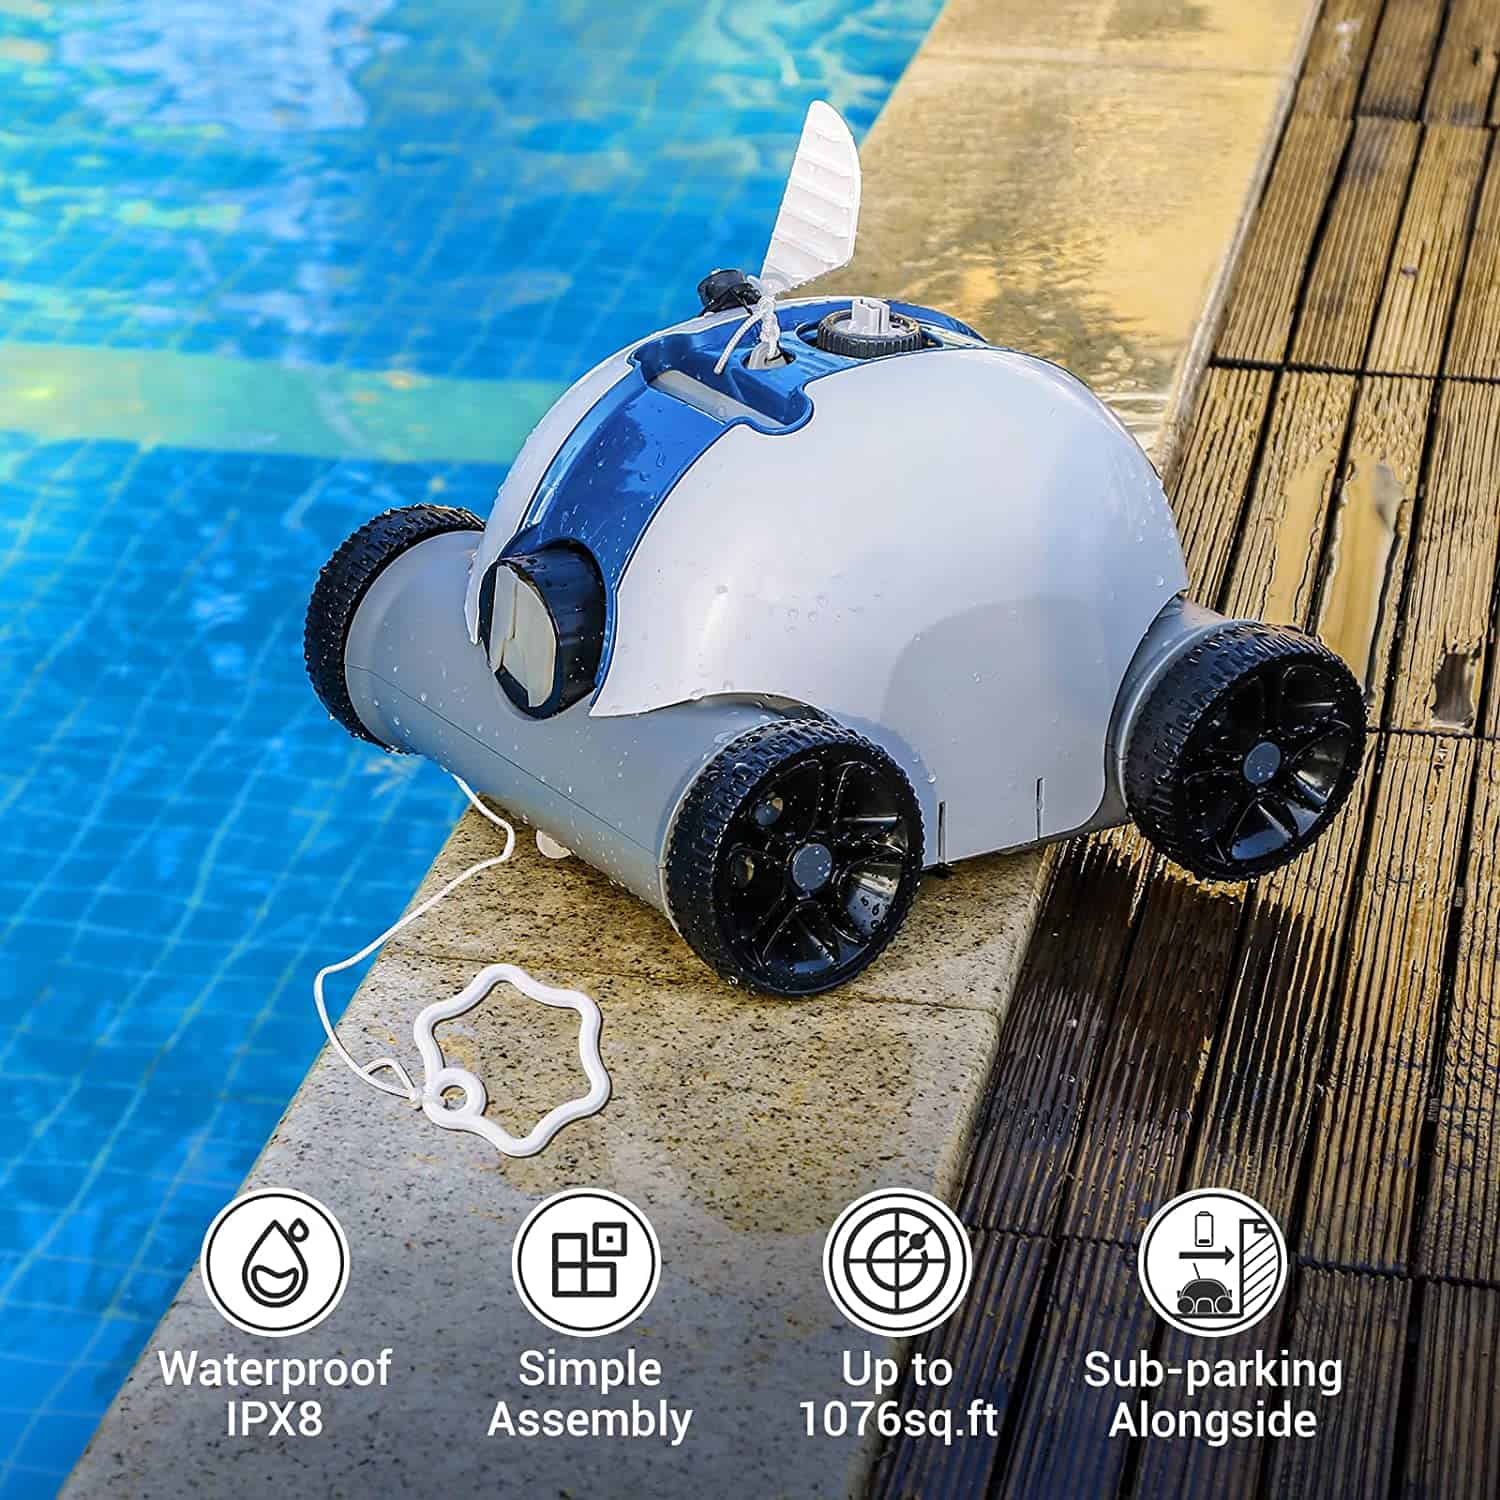 PAXCESS cordless robotic pool cleaner on the pool side with details of specs